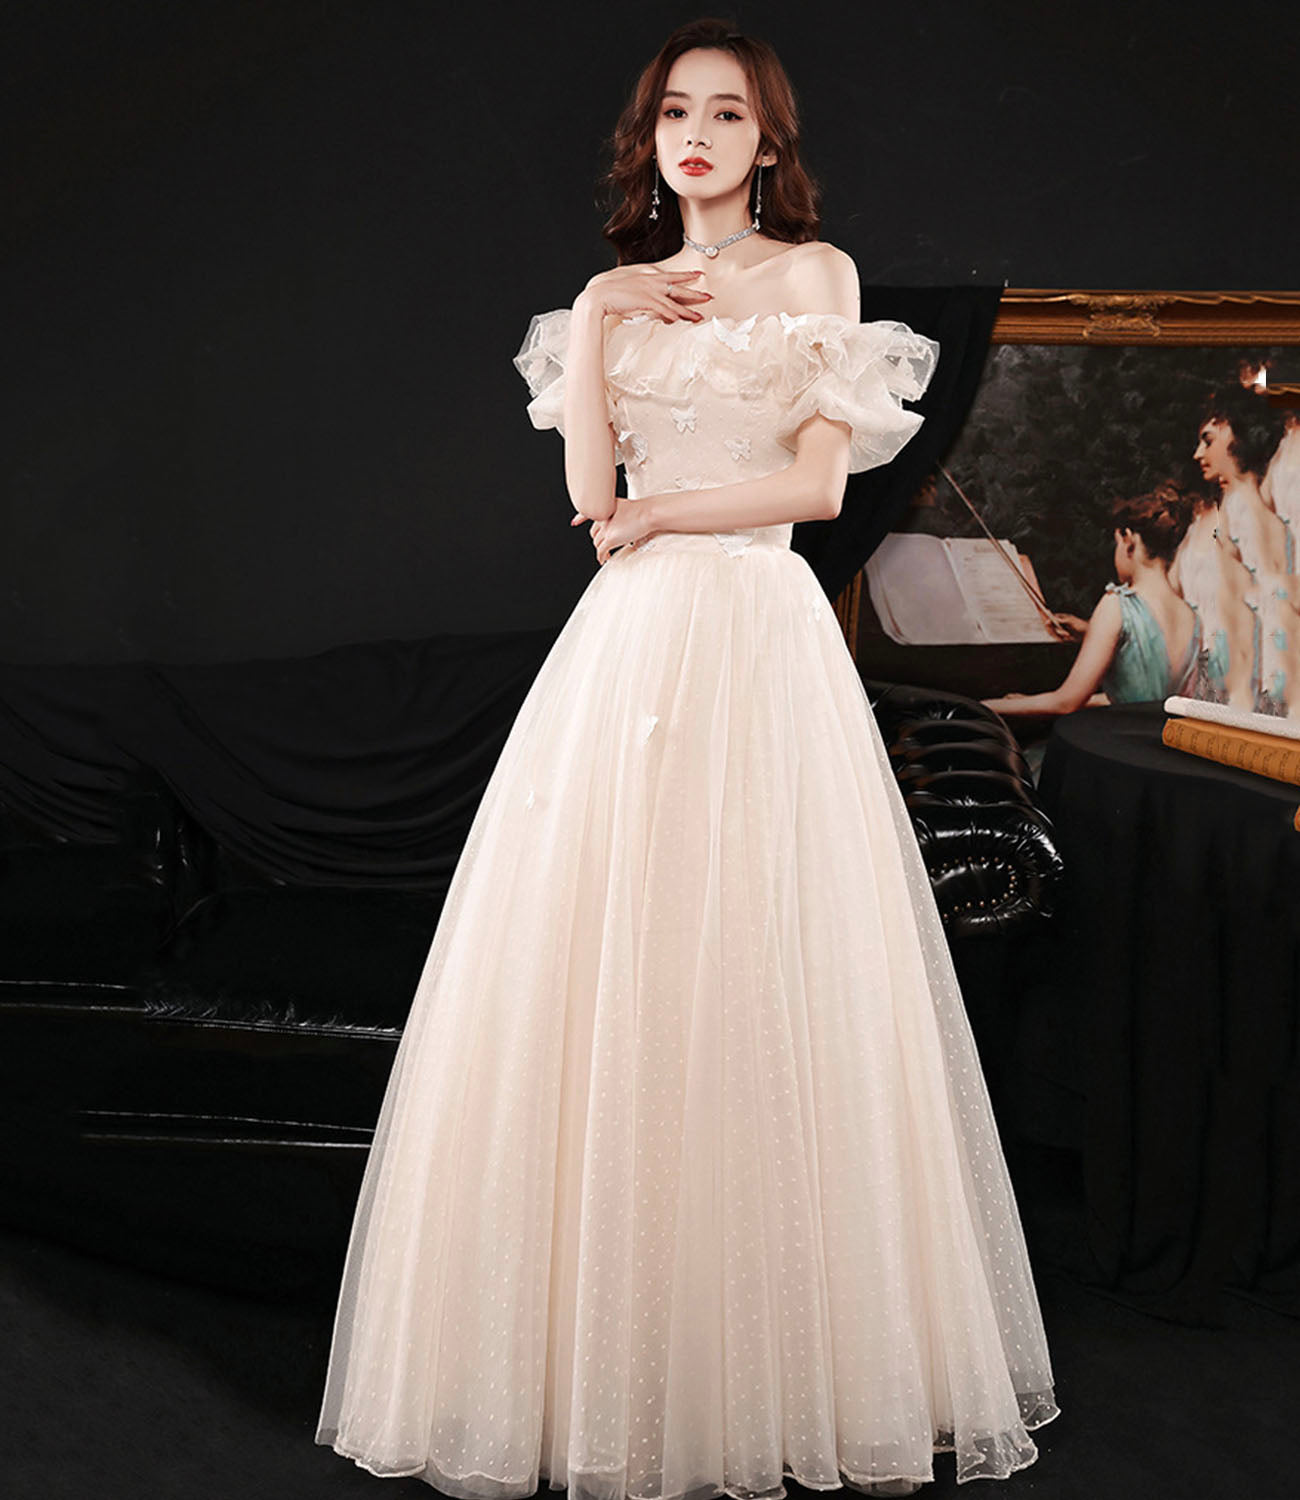 Champagne tulle long prom dress A line evening dress  10423